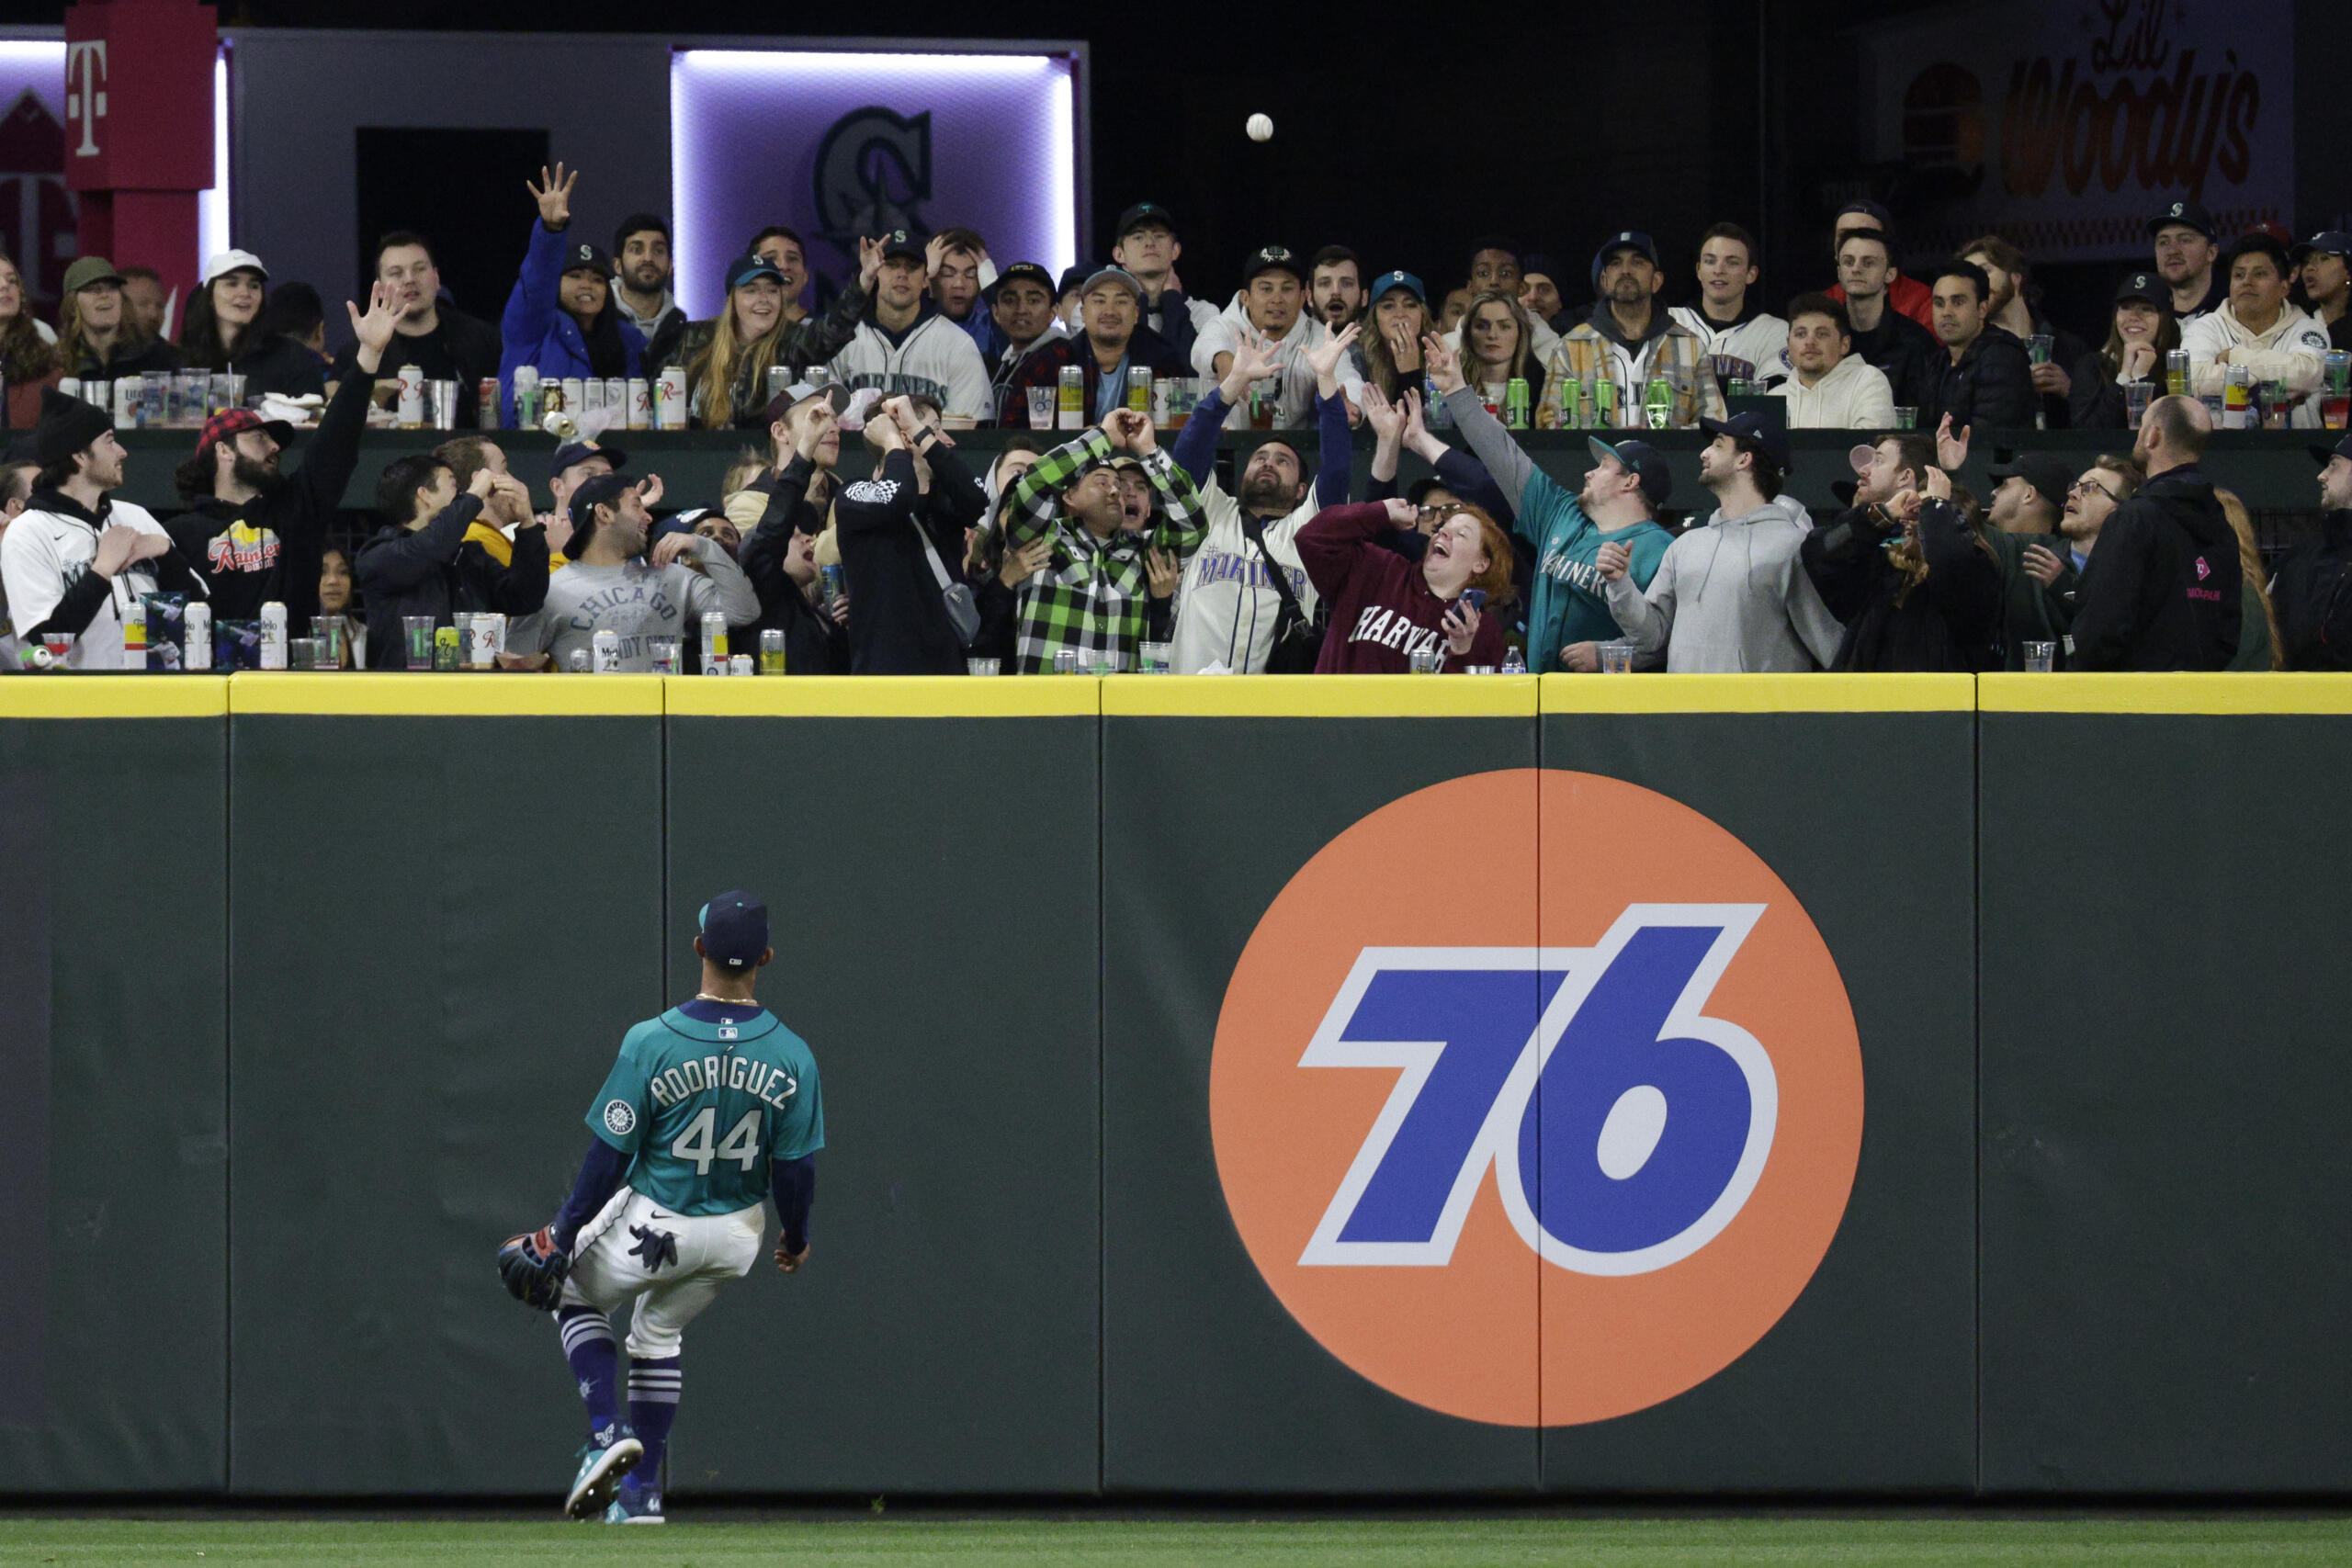 Seattle Mariners center fielder Julio Rodriguez watches as Tampa Bay Rays' Manuel Margot's three-run home run ball lands in the stands in the ninth inning of a baseball game, Friday, May 6, 2022, in Seattle. The Rays won 8-7.